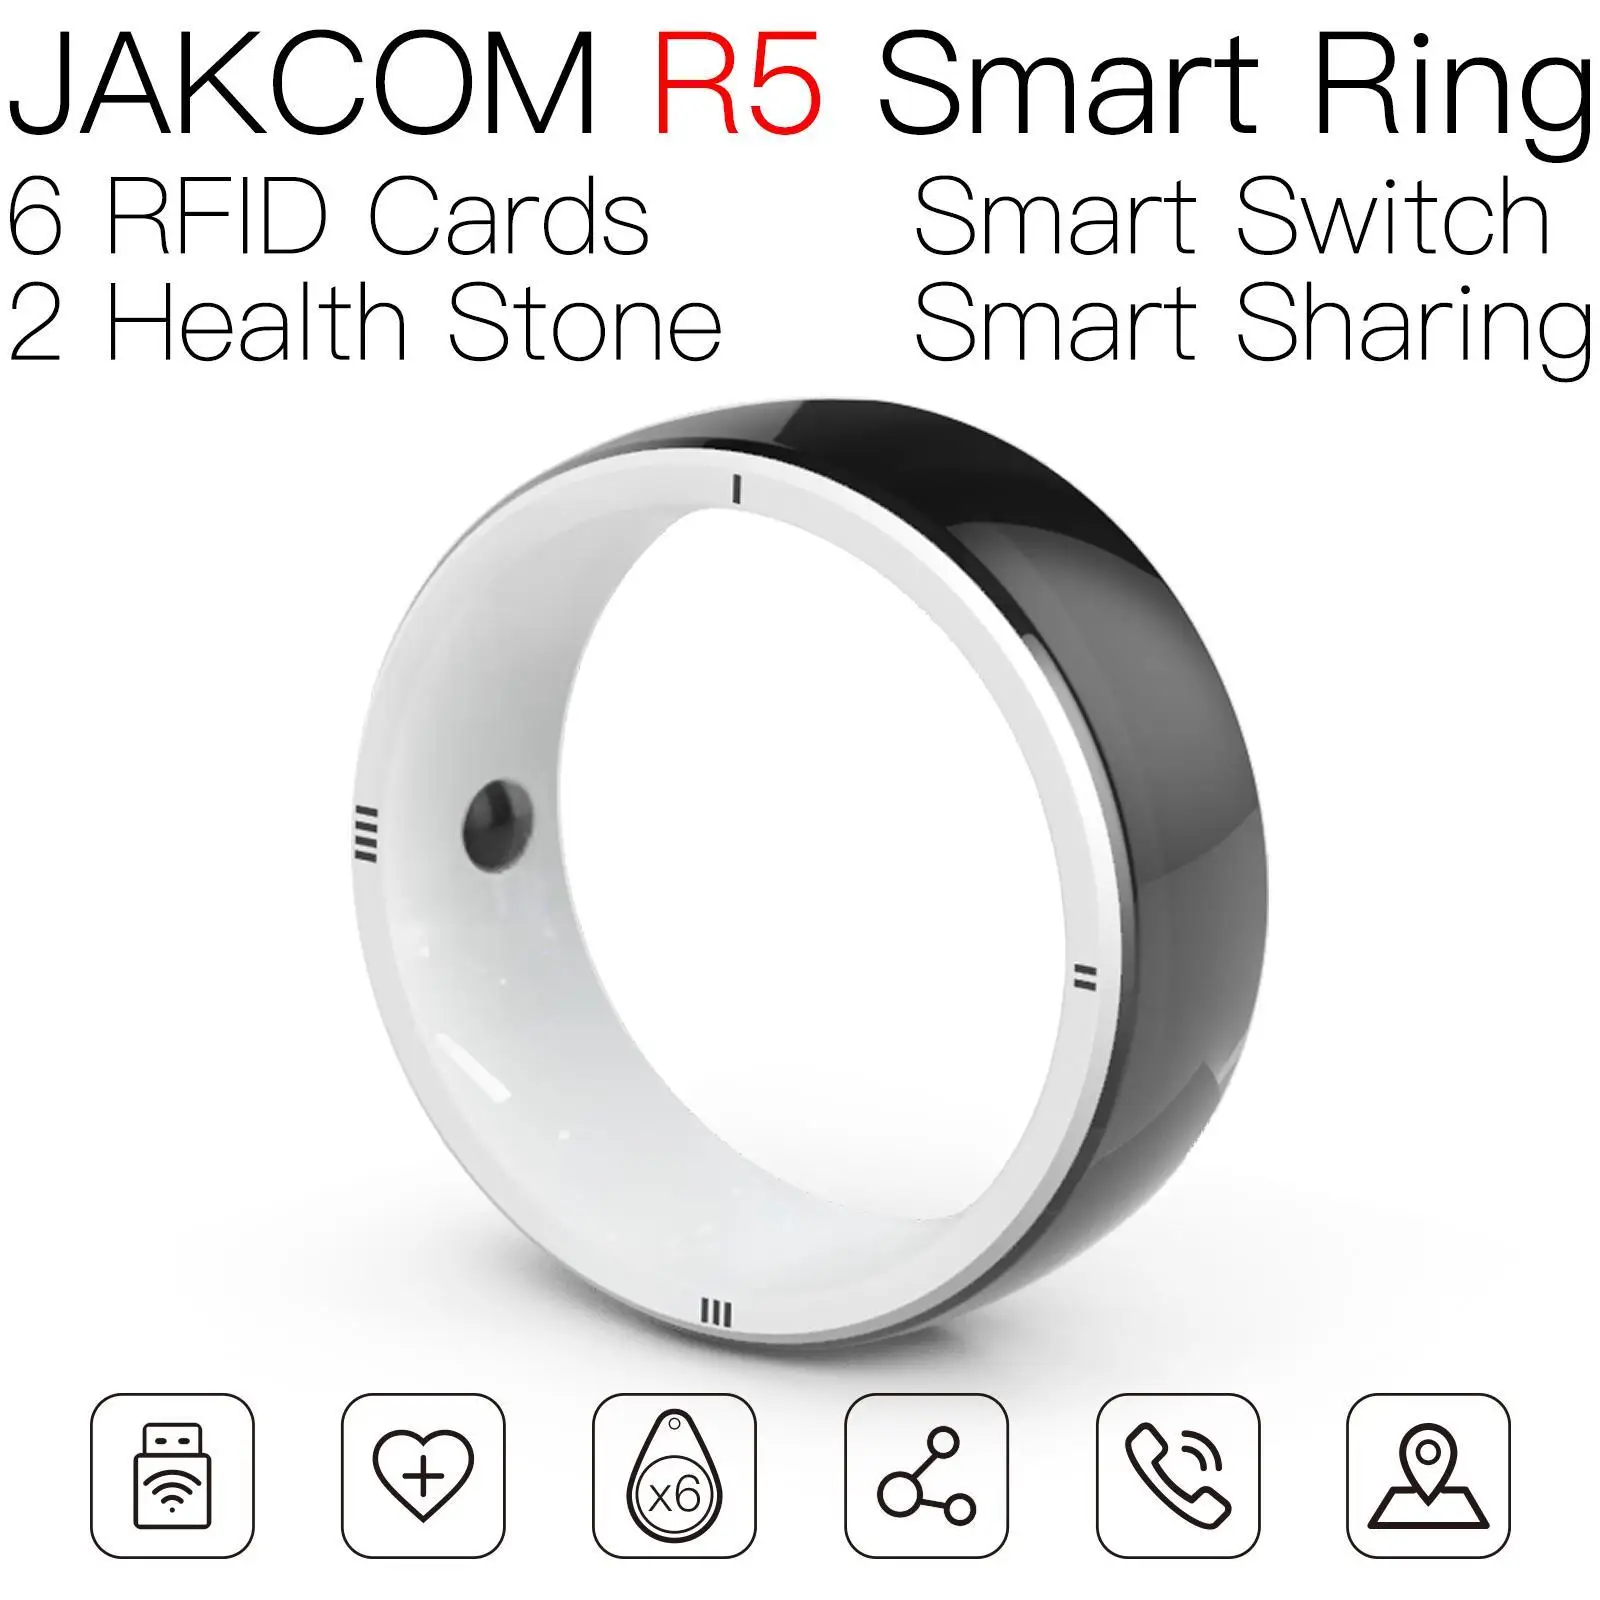 

JAKCOM R5 Smart Ring Newer than nfc disposable tag metal business card square black warranty protection sticker ring em4100